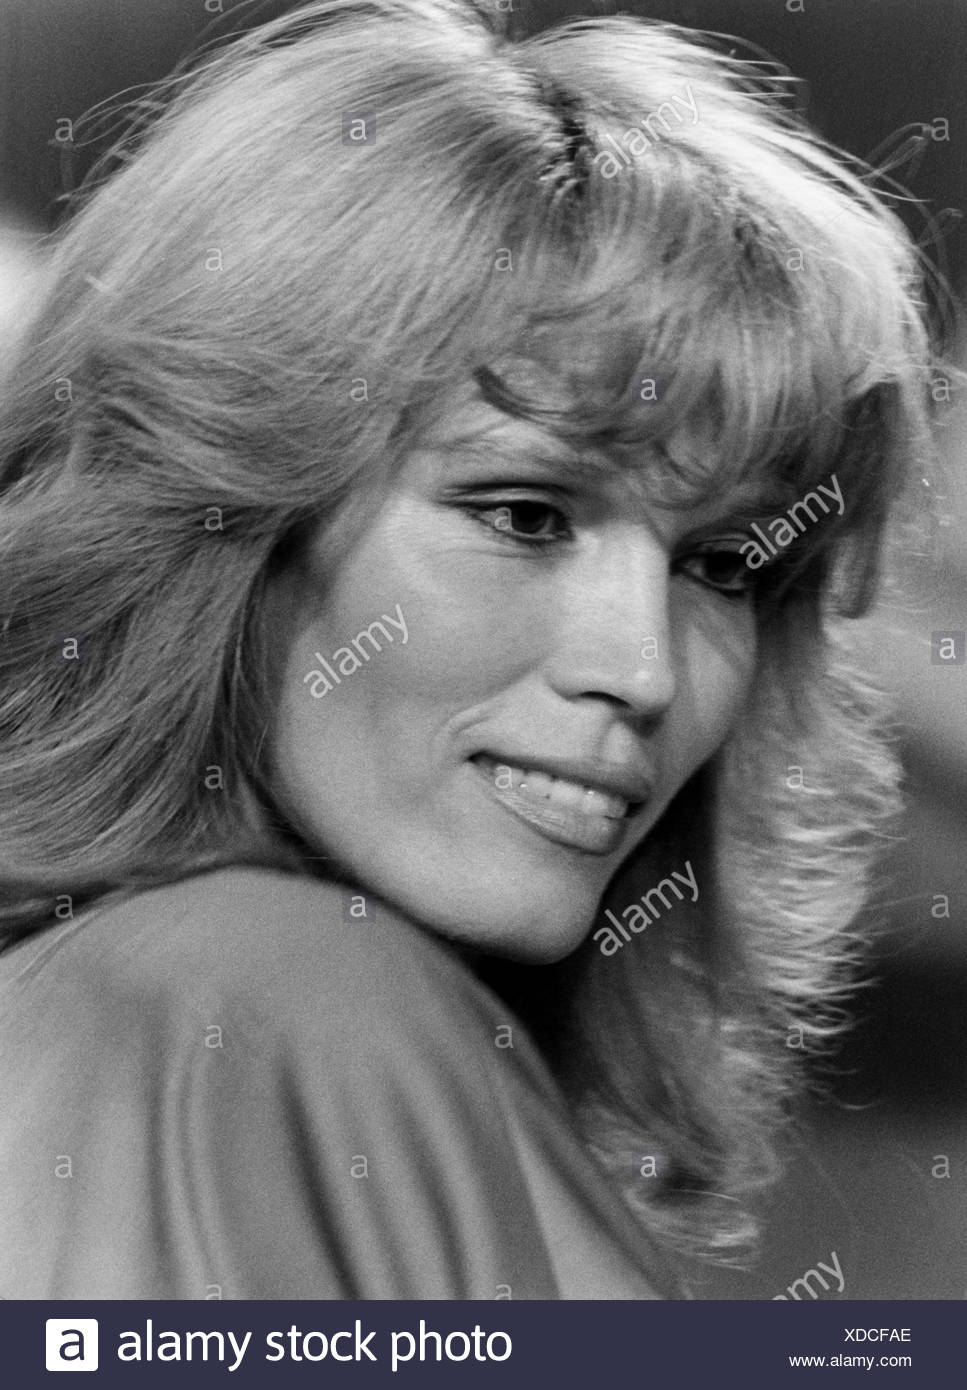 Amanda Lear High Resolution Stock Photography and Images - Alamy